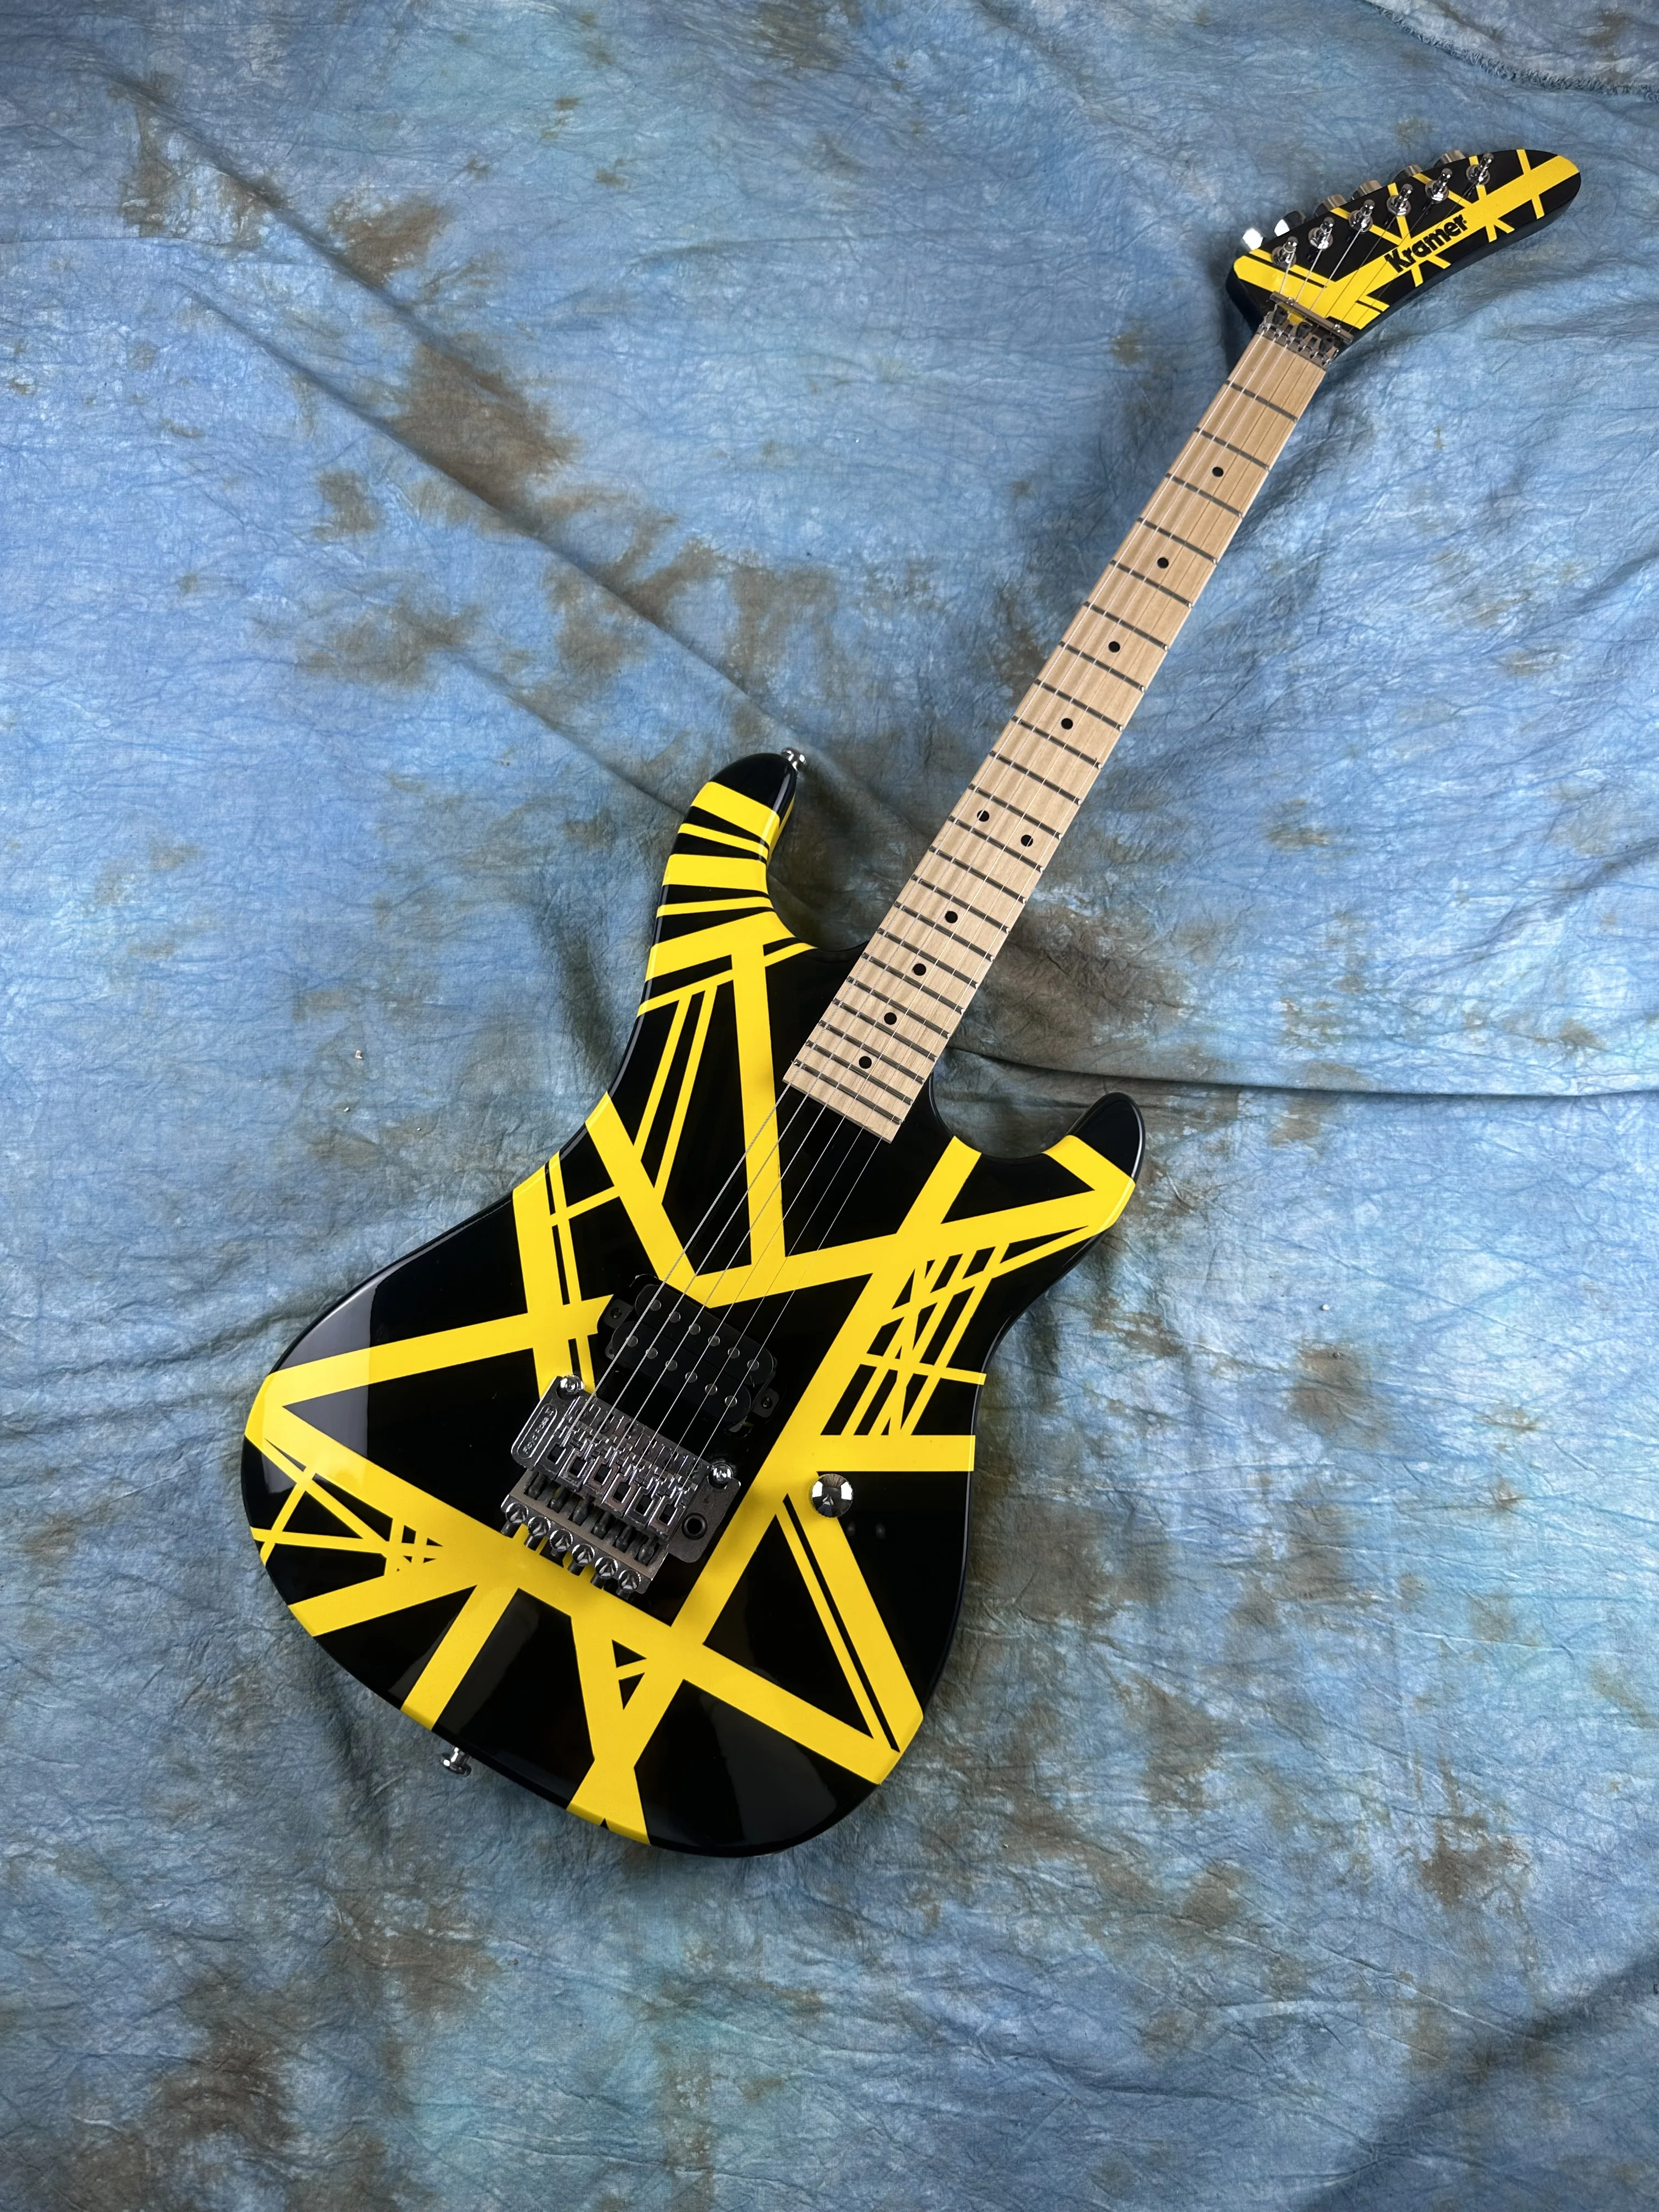 

5150 electric guitar, imported alder body, Canadian maple fingerboard, signed, classic yello and white stripes, lightning packag